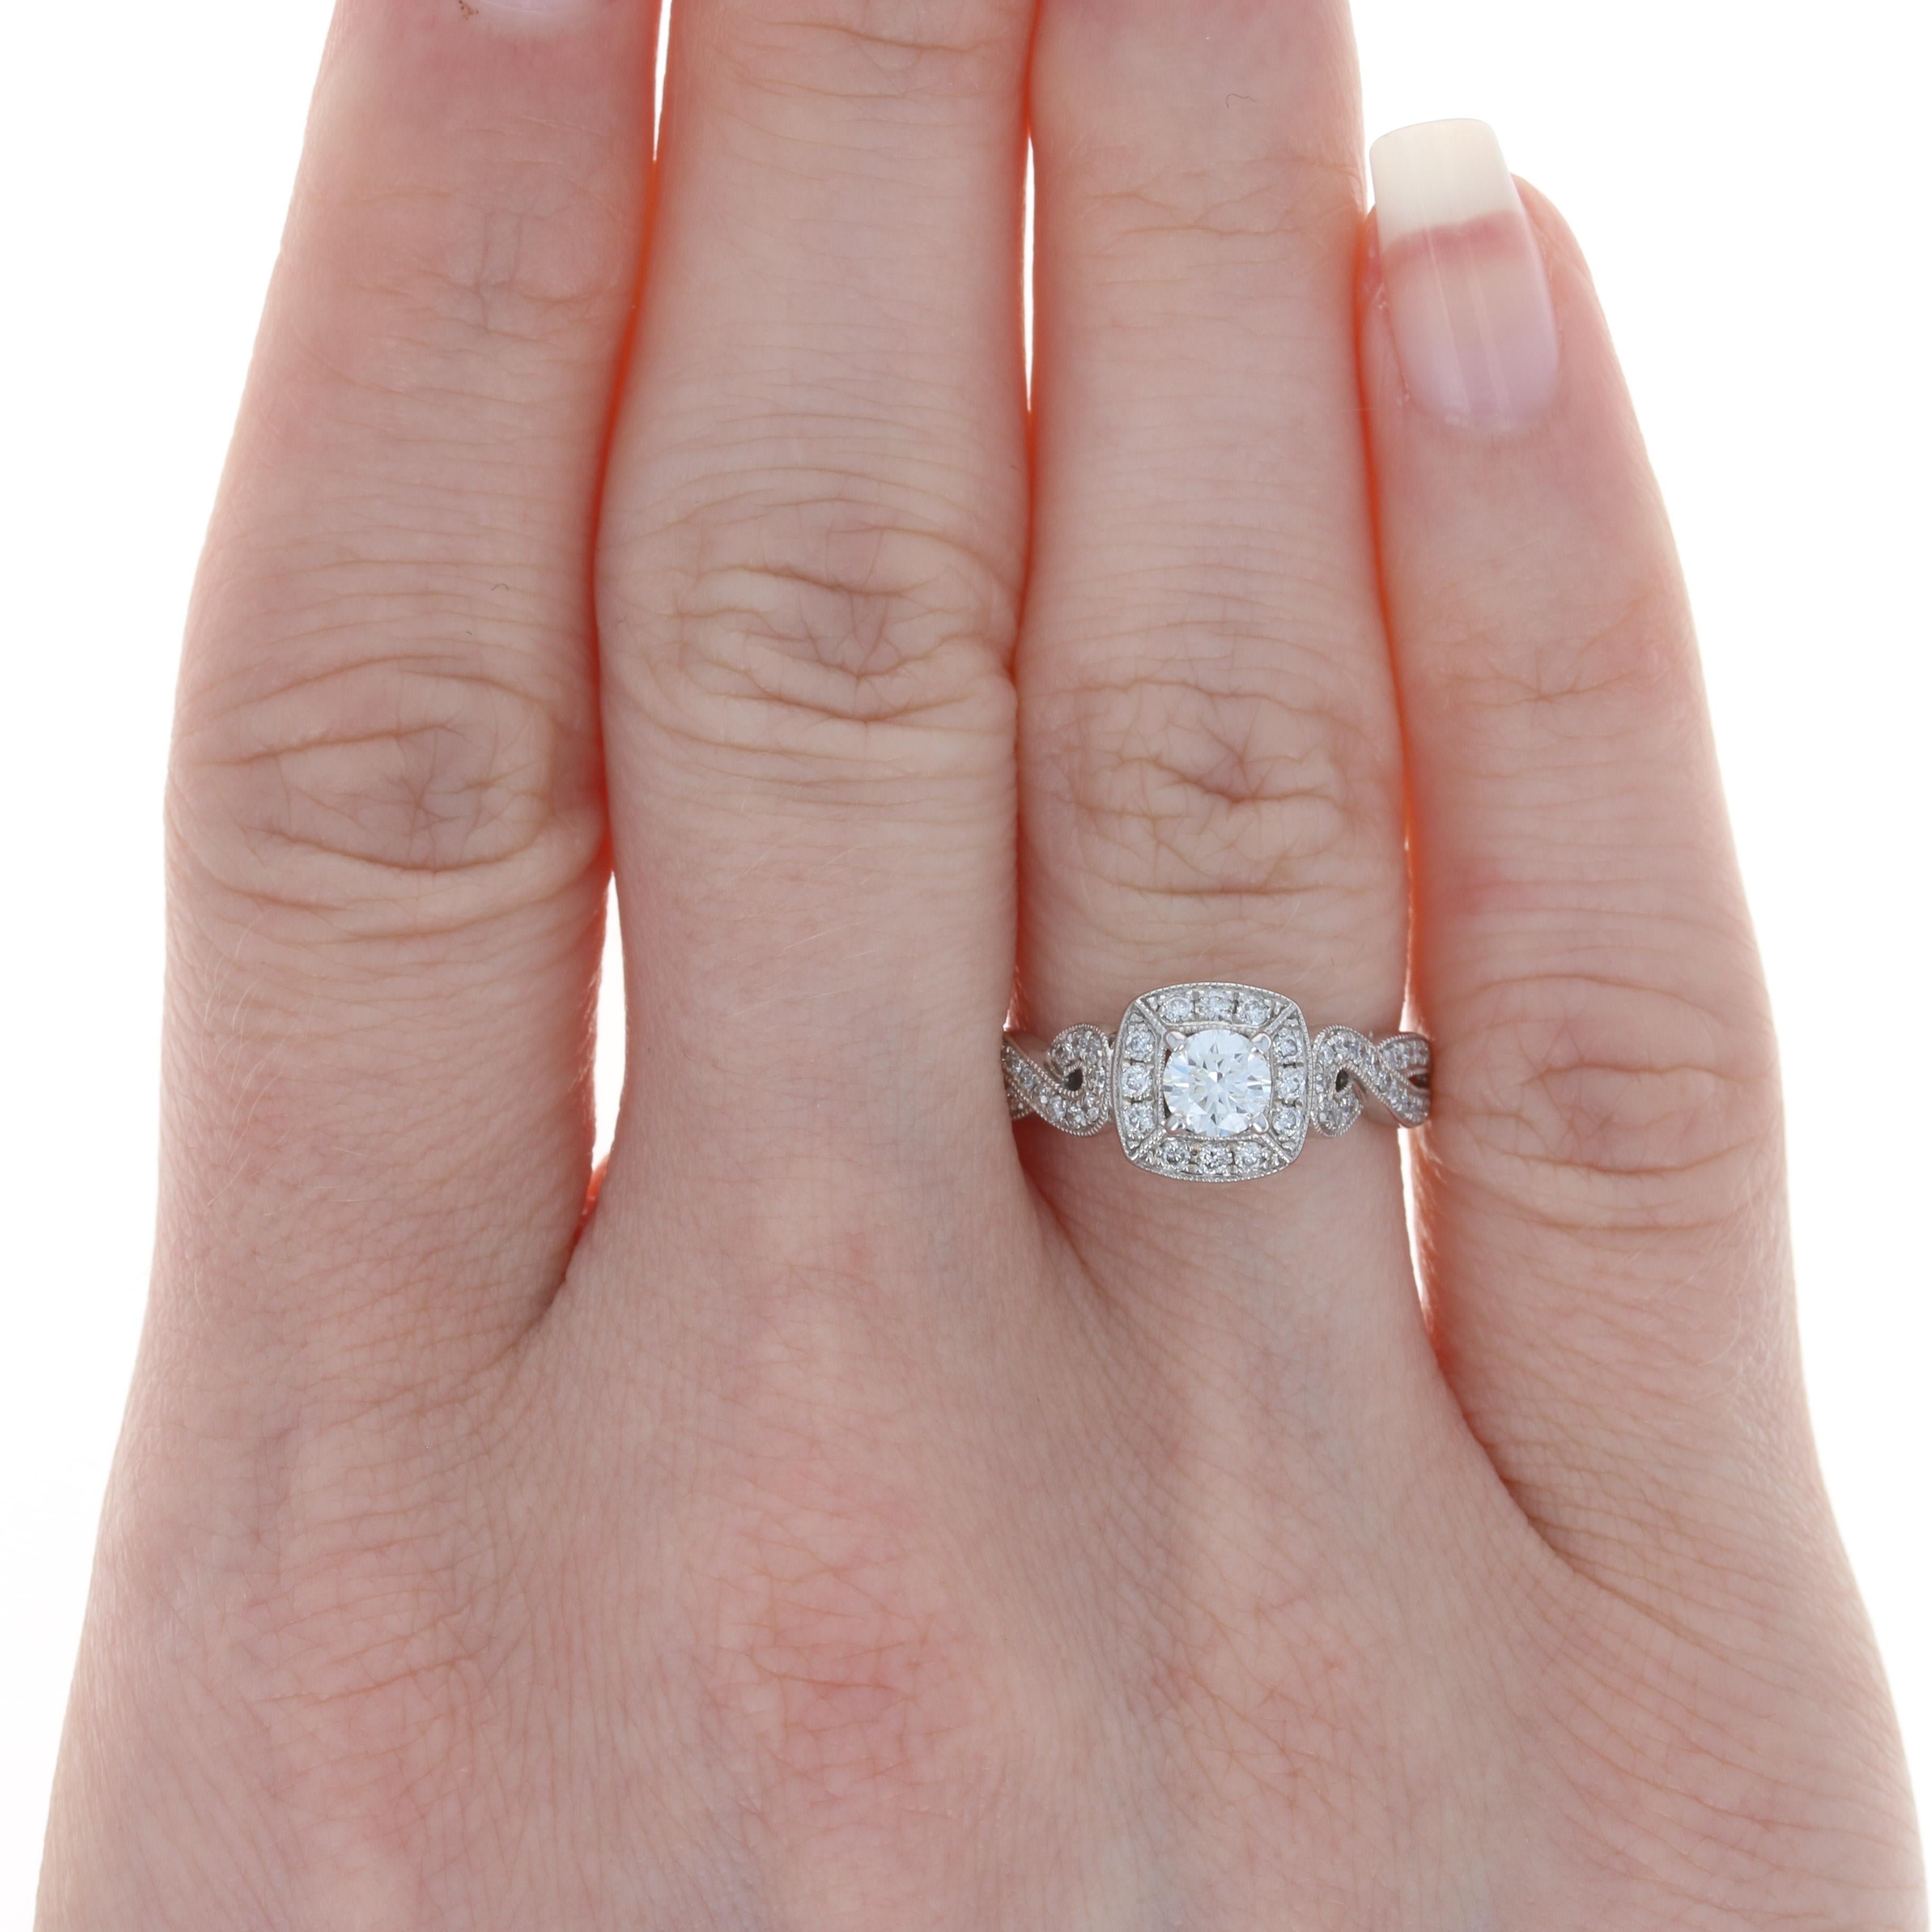 Size: 6
Sizing Fee: Down 1 size or up 2 sizes for a $25 fee

Metal Content: 14k White Gold

Stone Information: 
Natural Diamond Solitaire
Carat: .33ct
Cut: Round Brilliant
Color:  F 
Clarity: I1

Natural Diamond Accents
Carats: .26ctw
Cut: Round